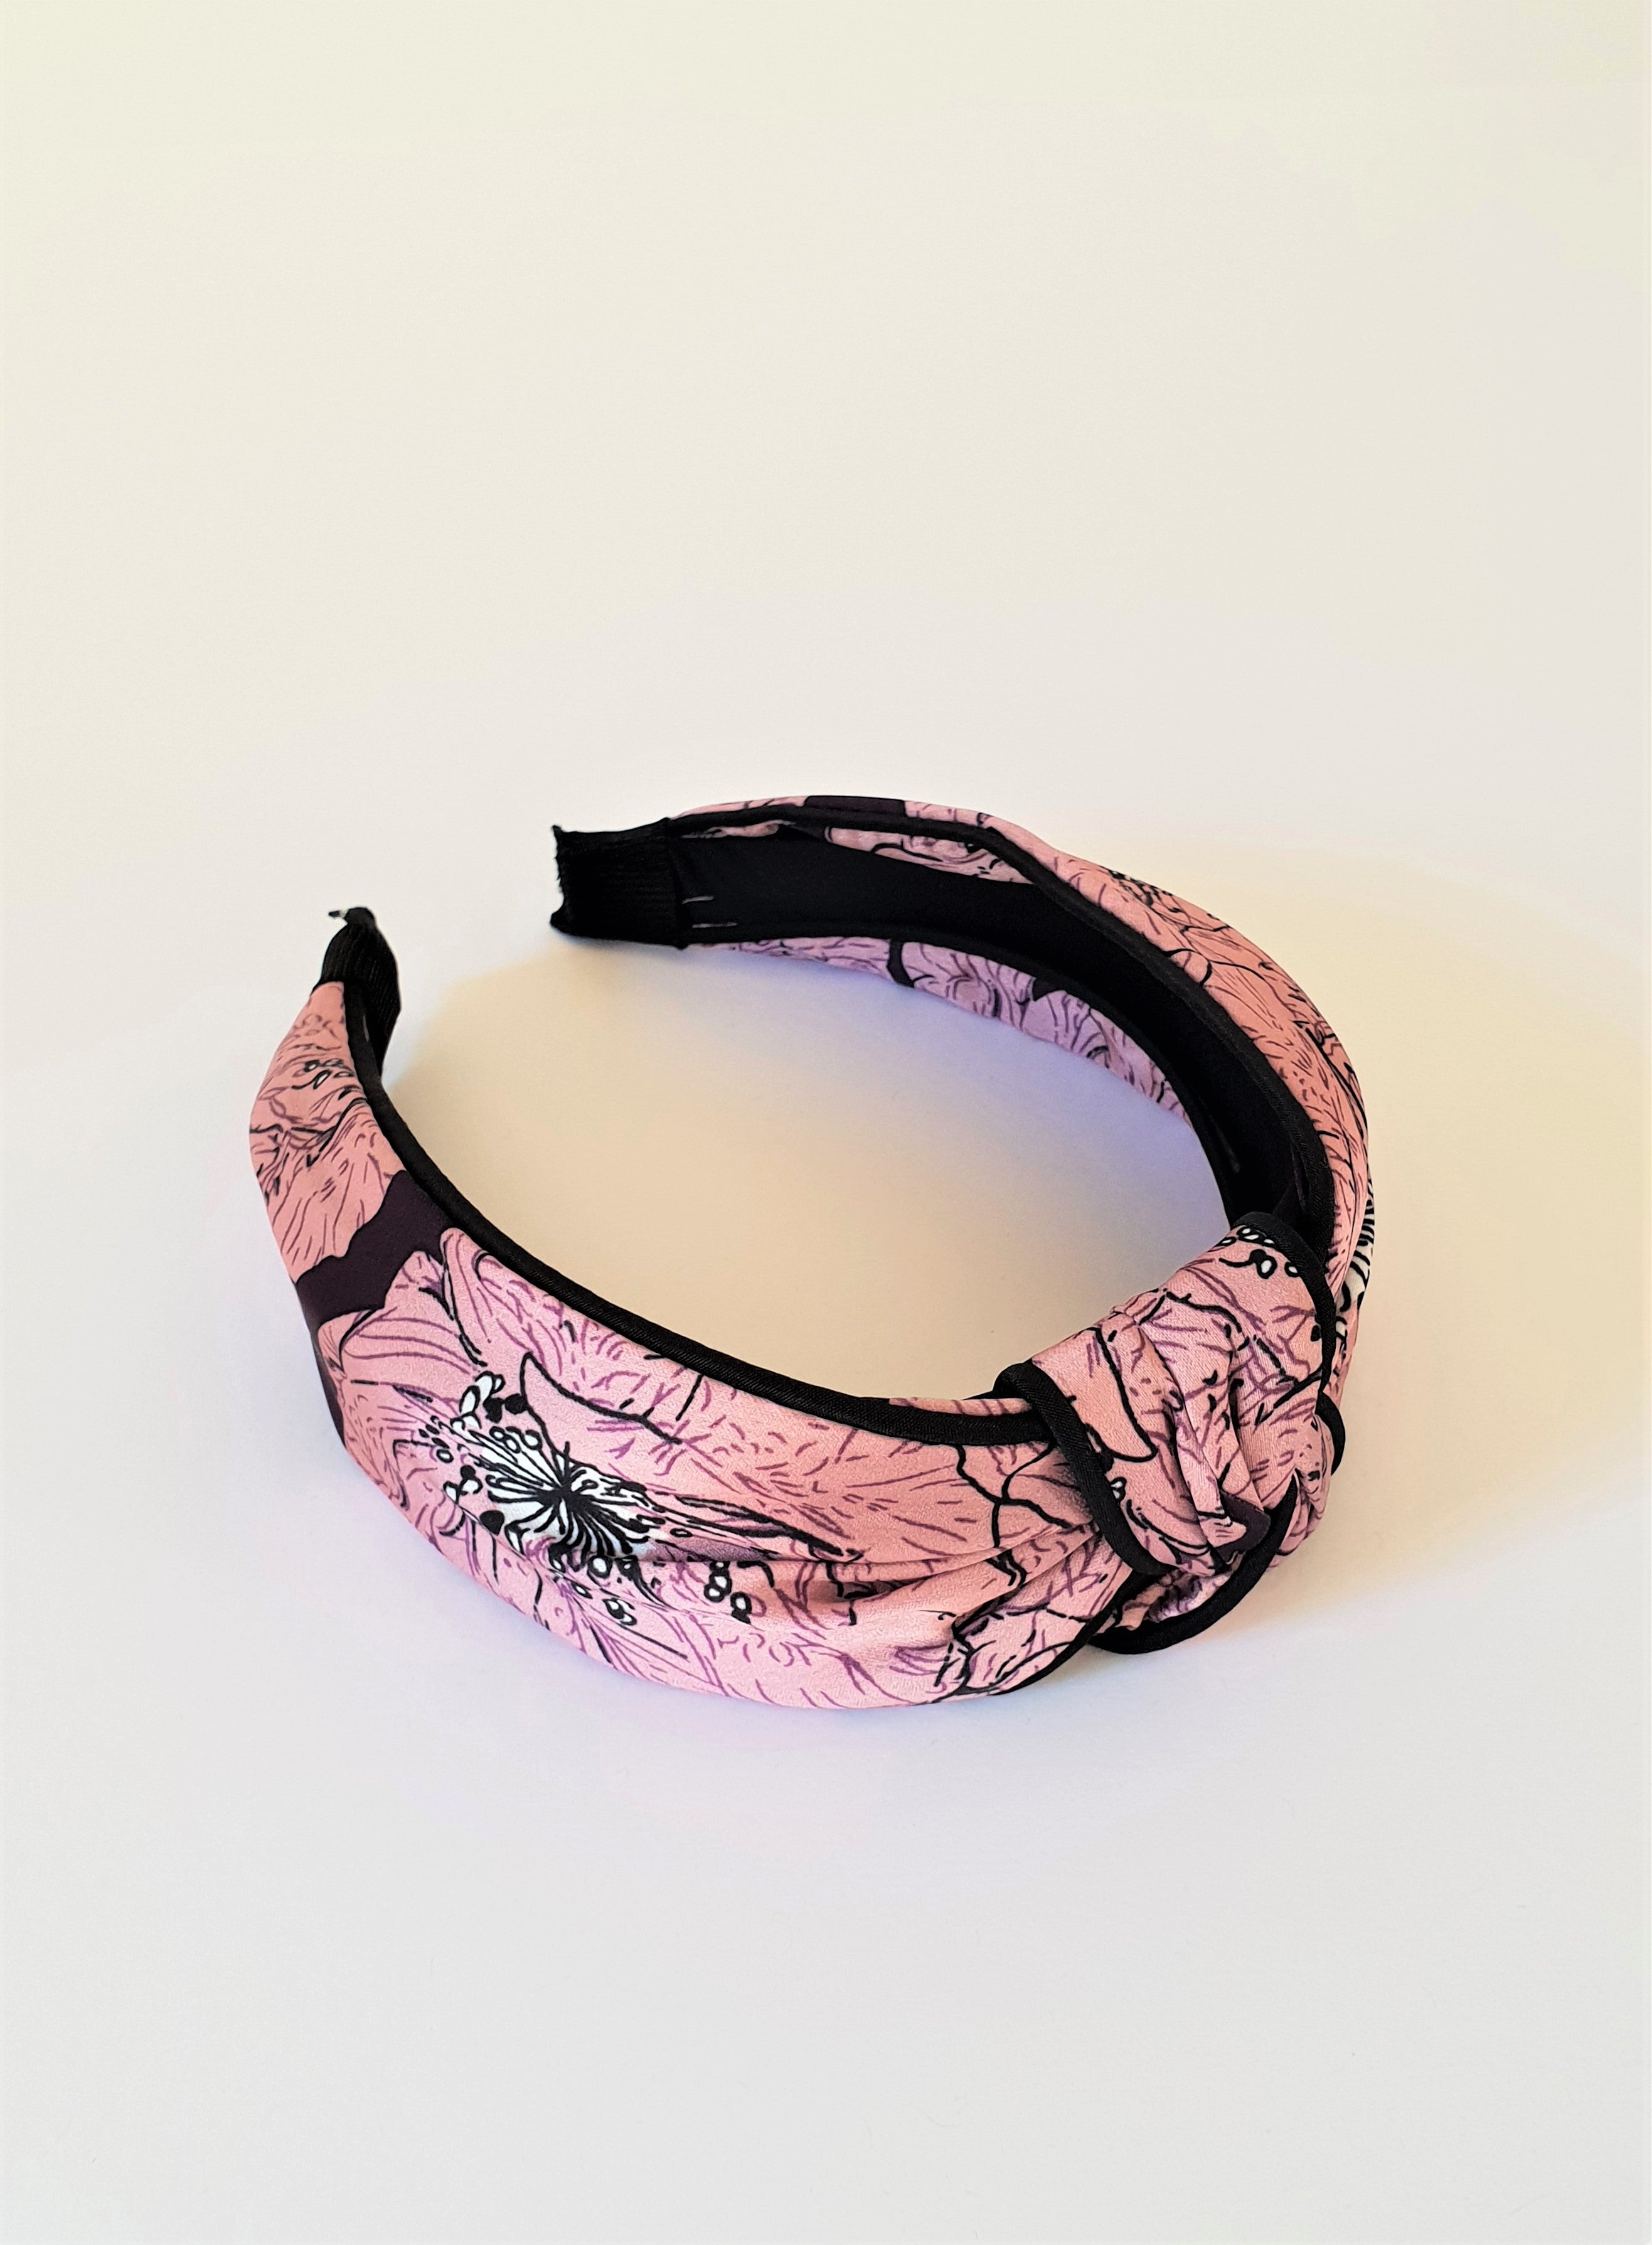 FLORAL SATIN KNOT ALICE BAND - RASPERRY